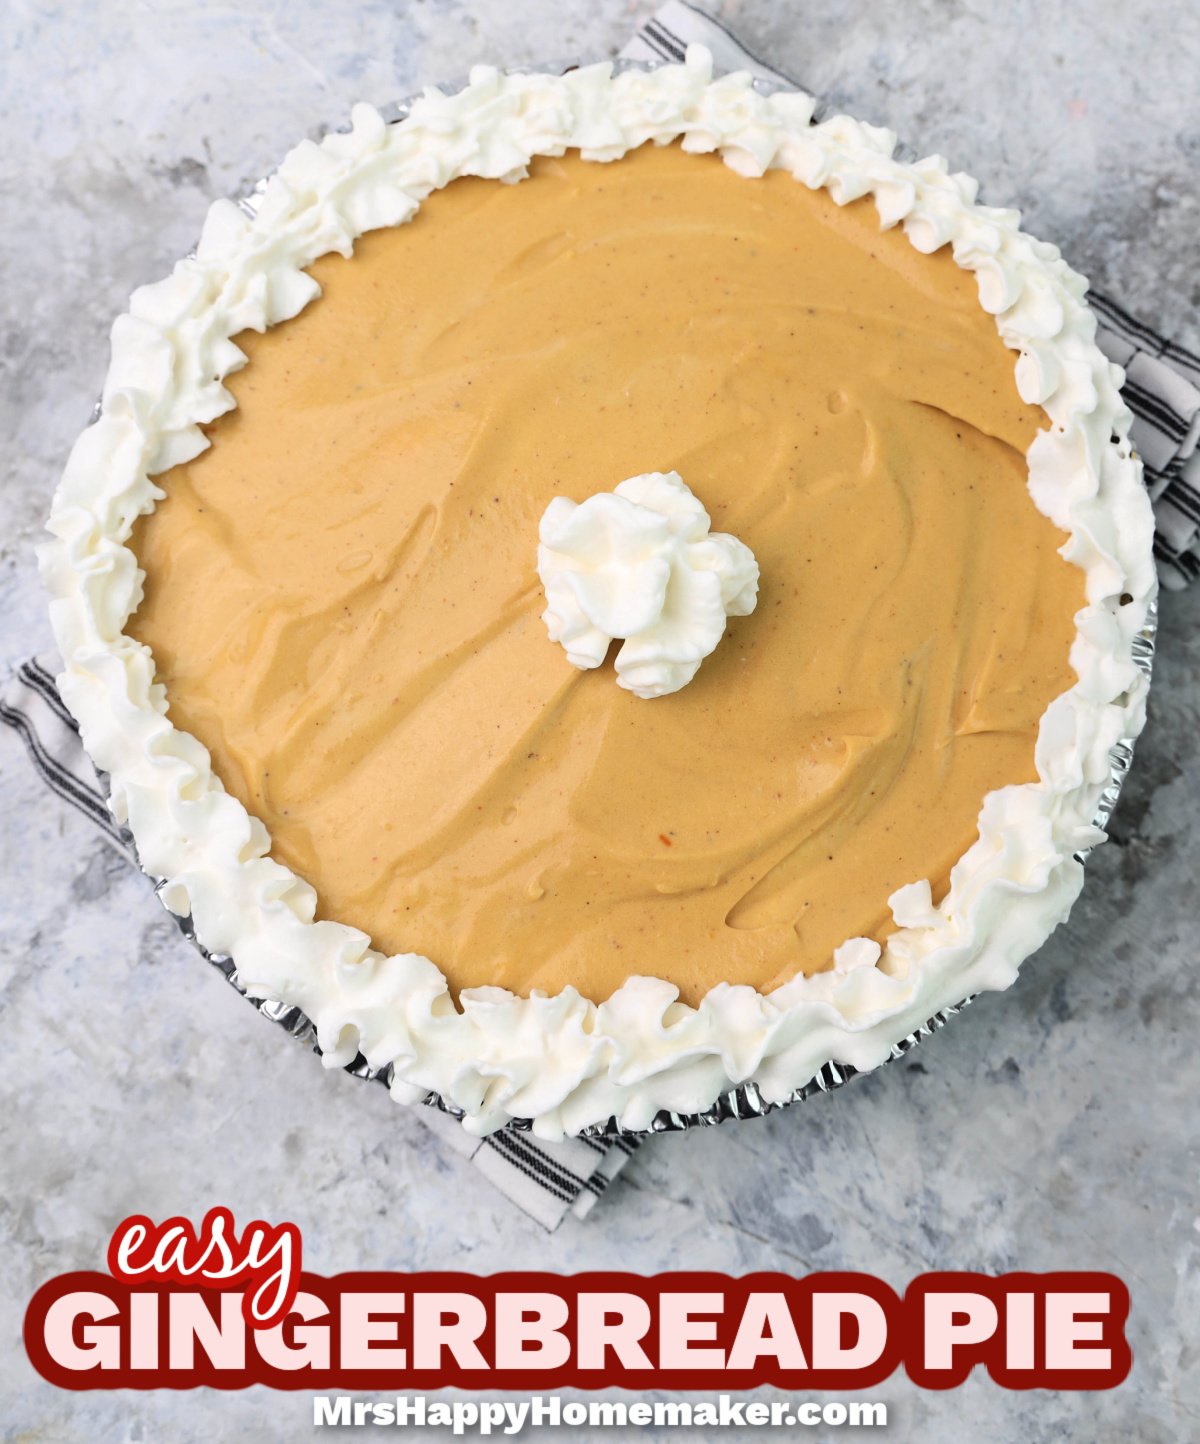 Gingerbread pie, with a whipped cream border, on a marble counter 